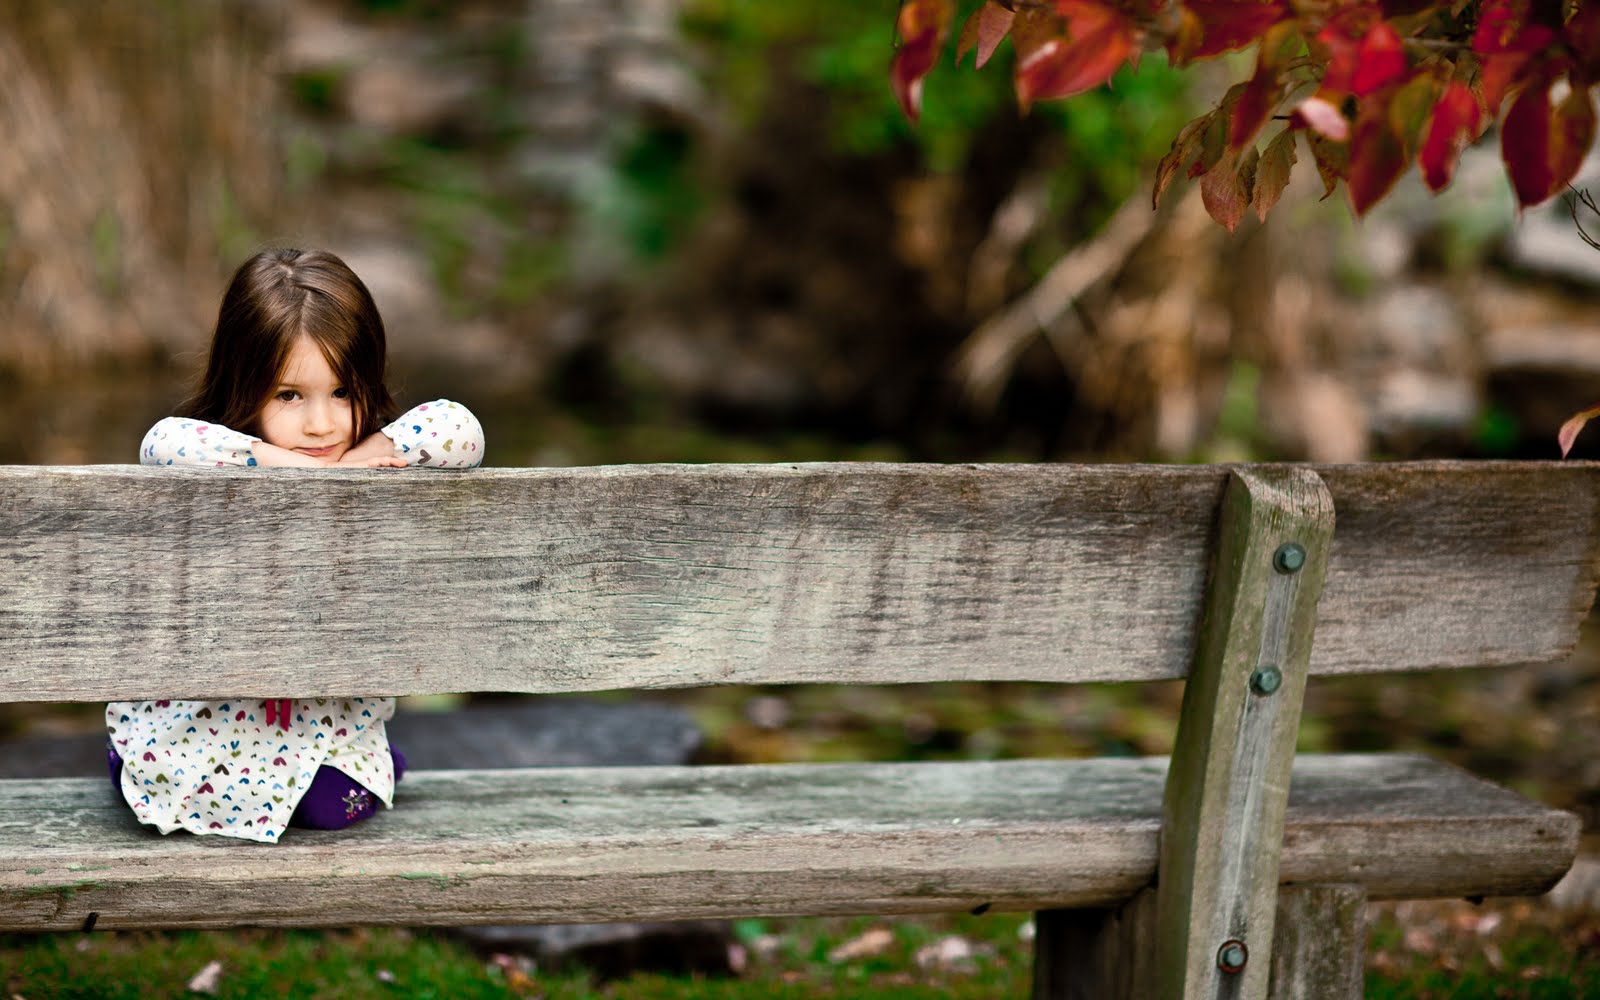 BEAUTIFUL LOVE WALLPAPERS: Mood Kids Photo Girl Look Park Forest Smile Sitting Bench HD Love Wallpaper